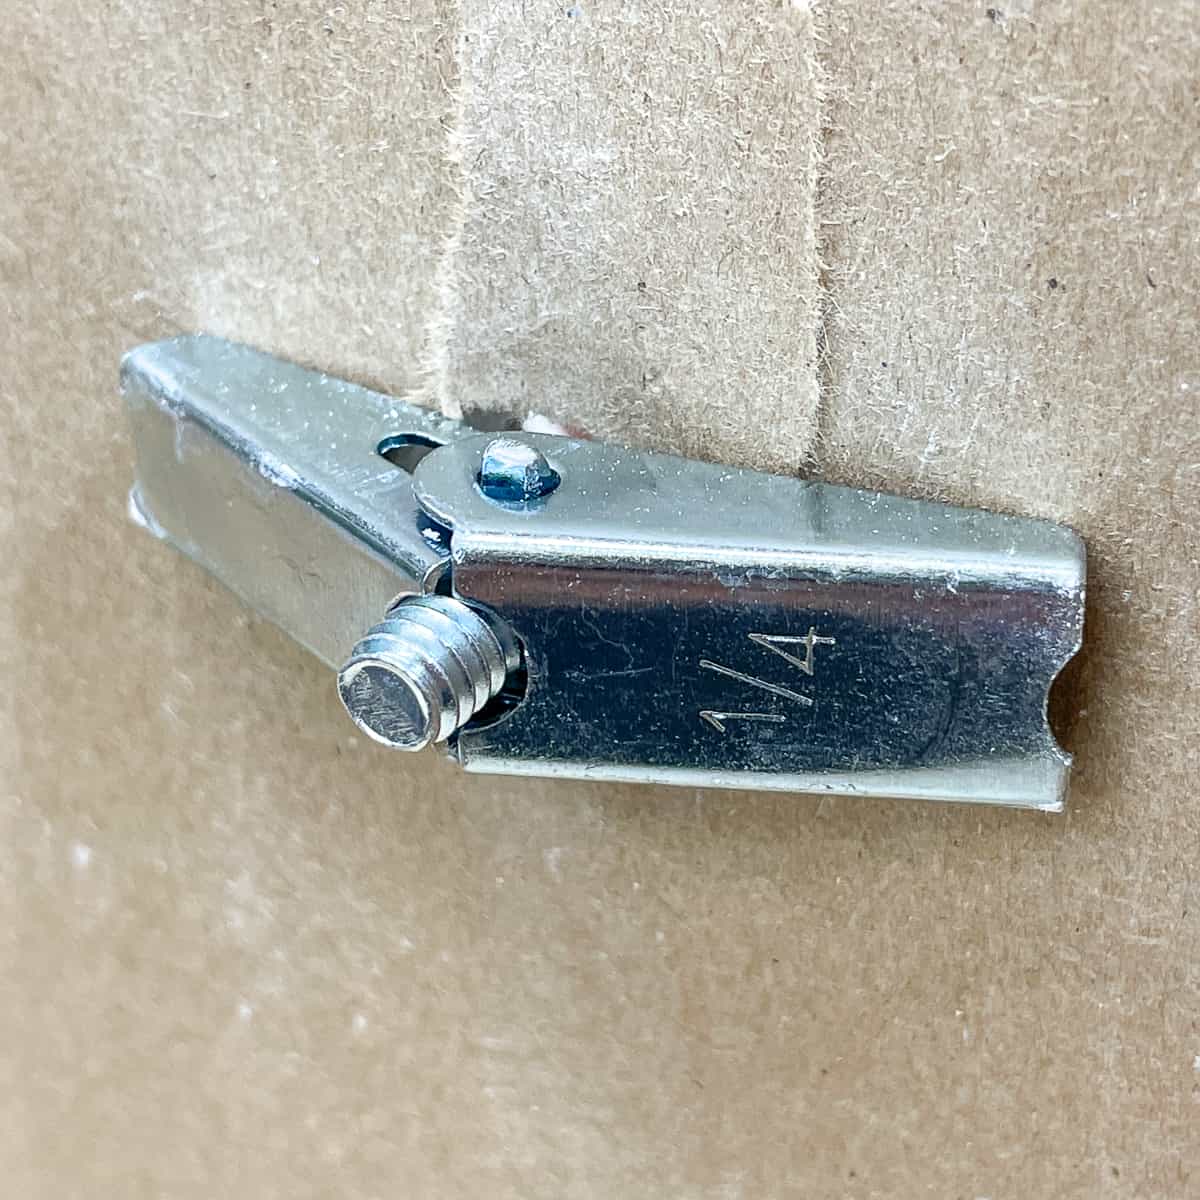 wings of toggle bolt flat against the inside of the drywall